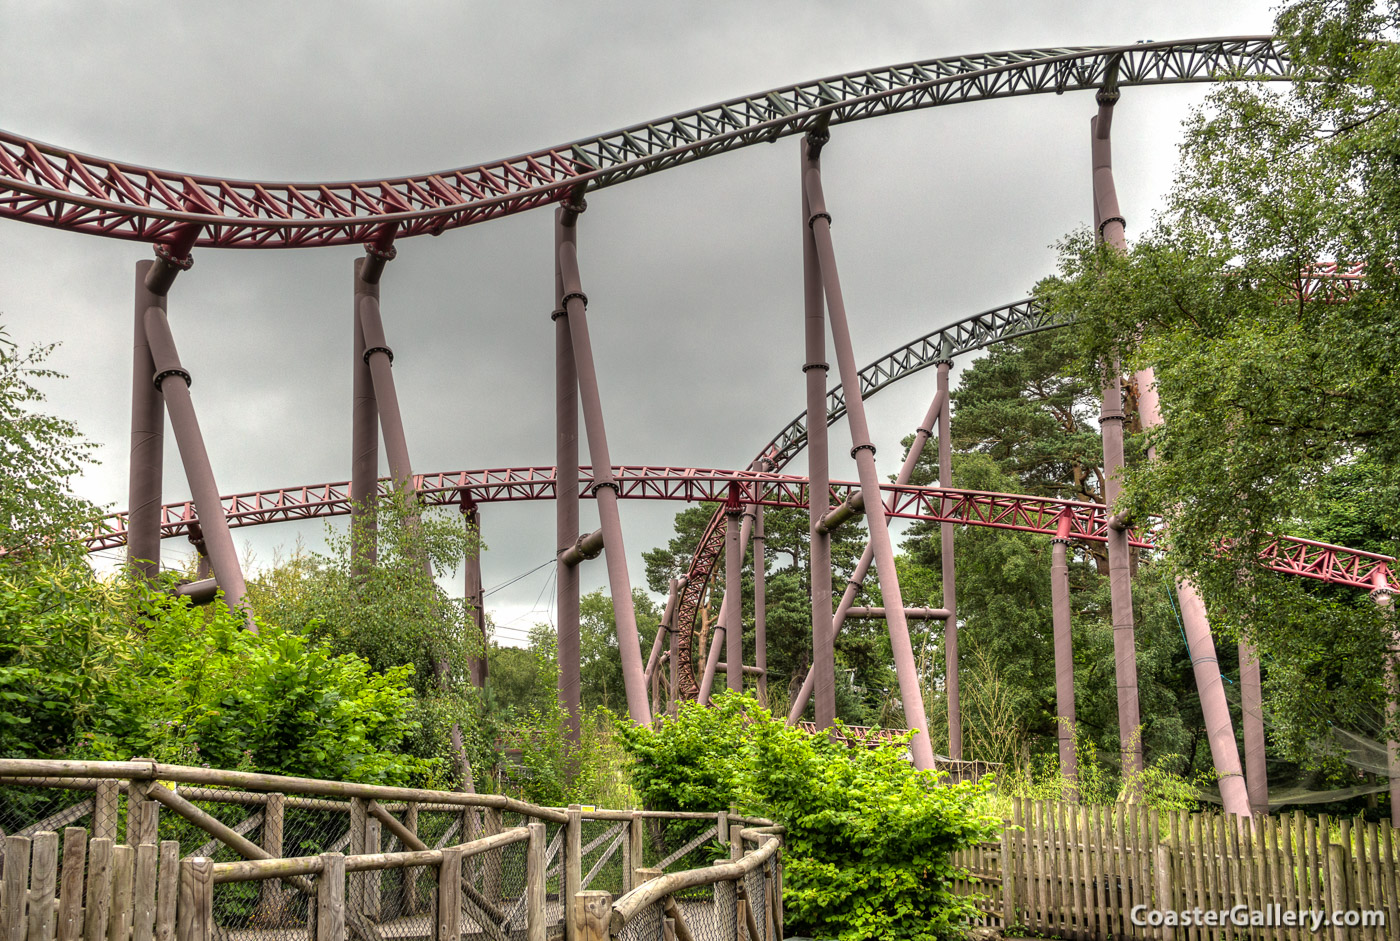 Drag Race roller coaster at Alton Towers